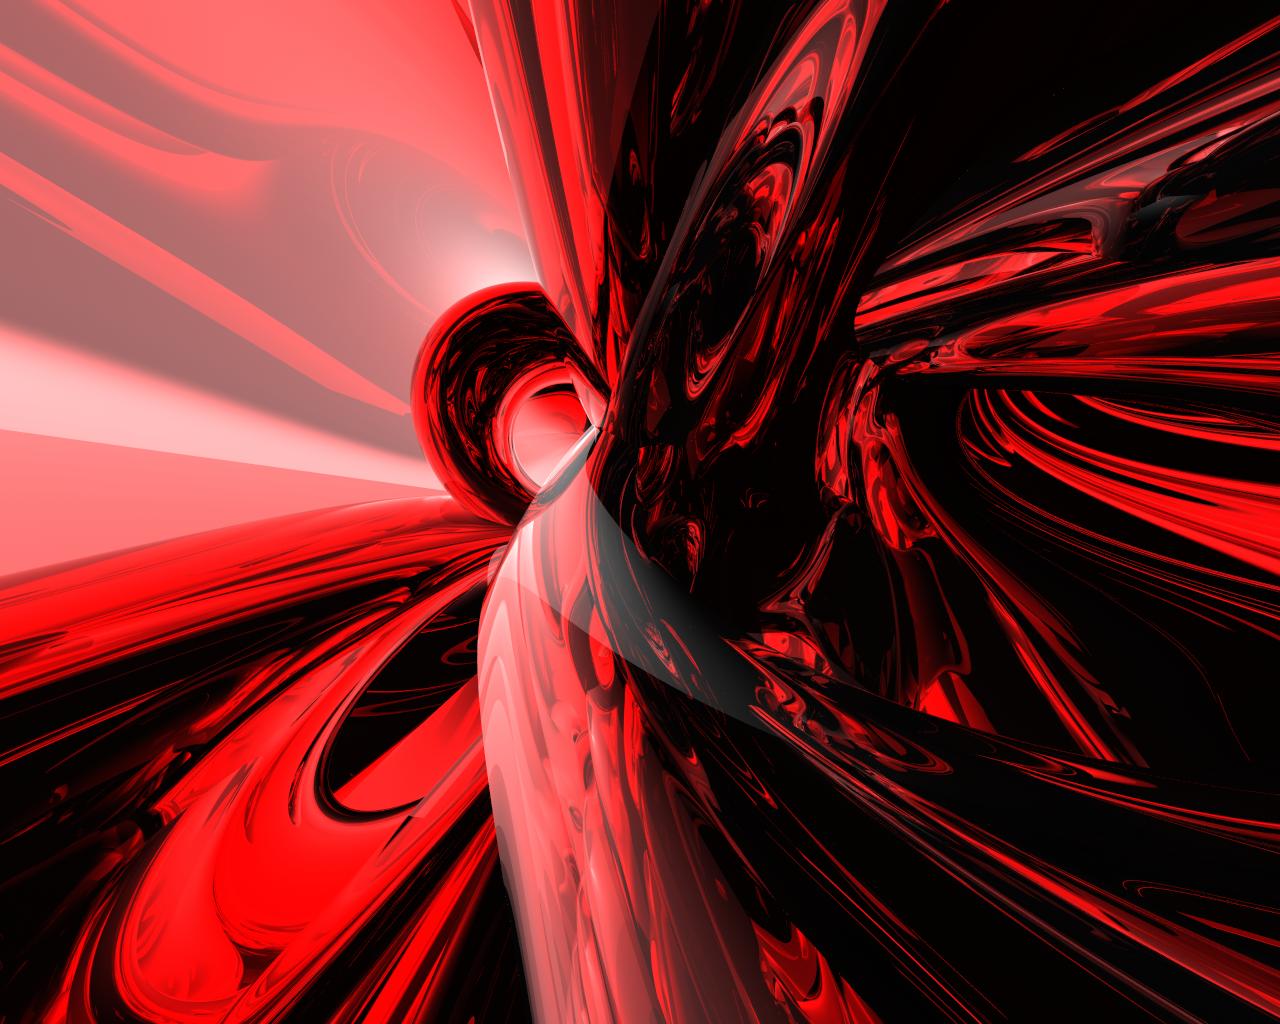 Black And Red Abstract Backgrounds